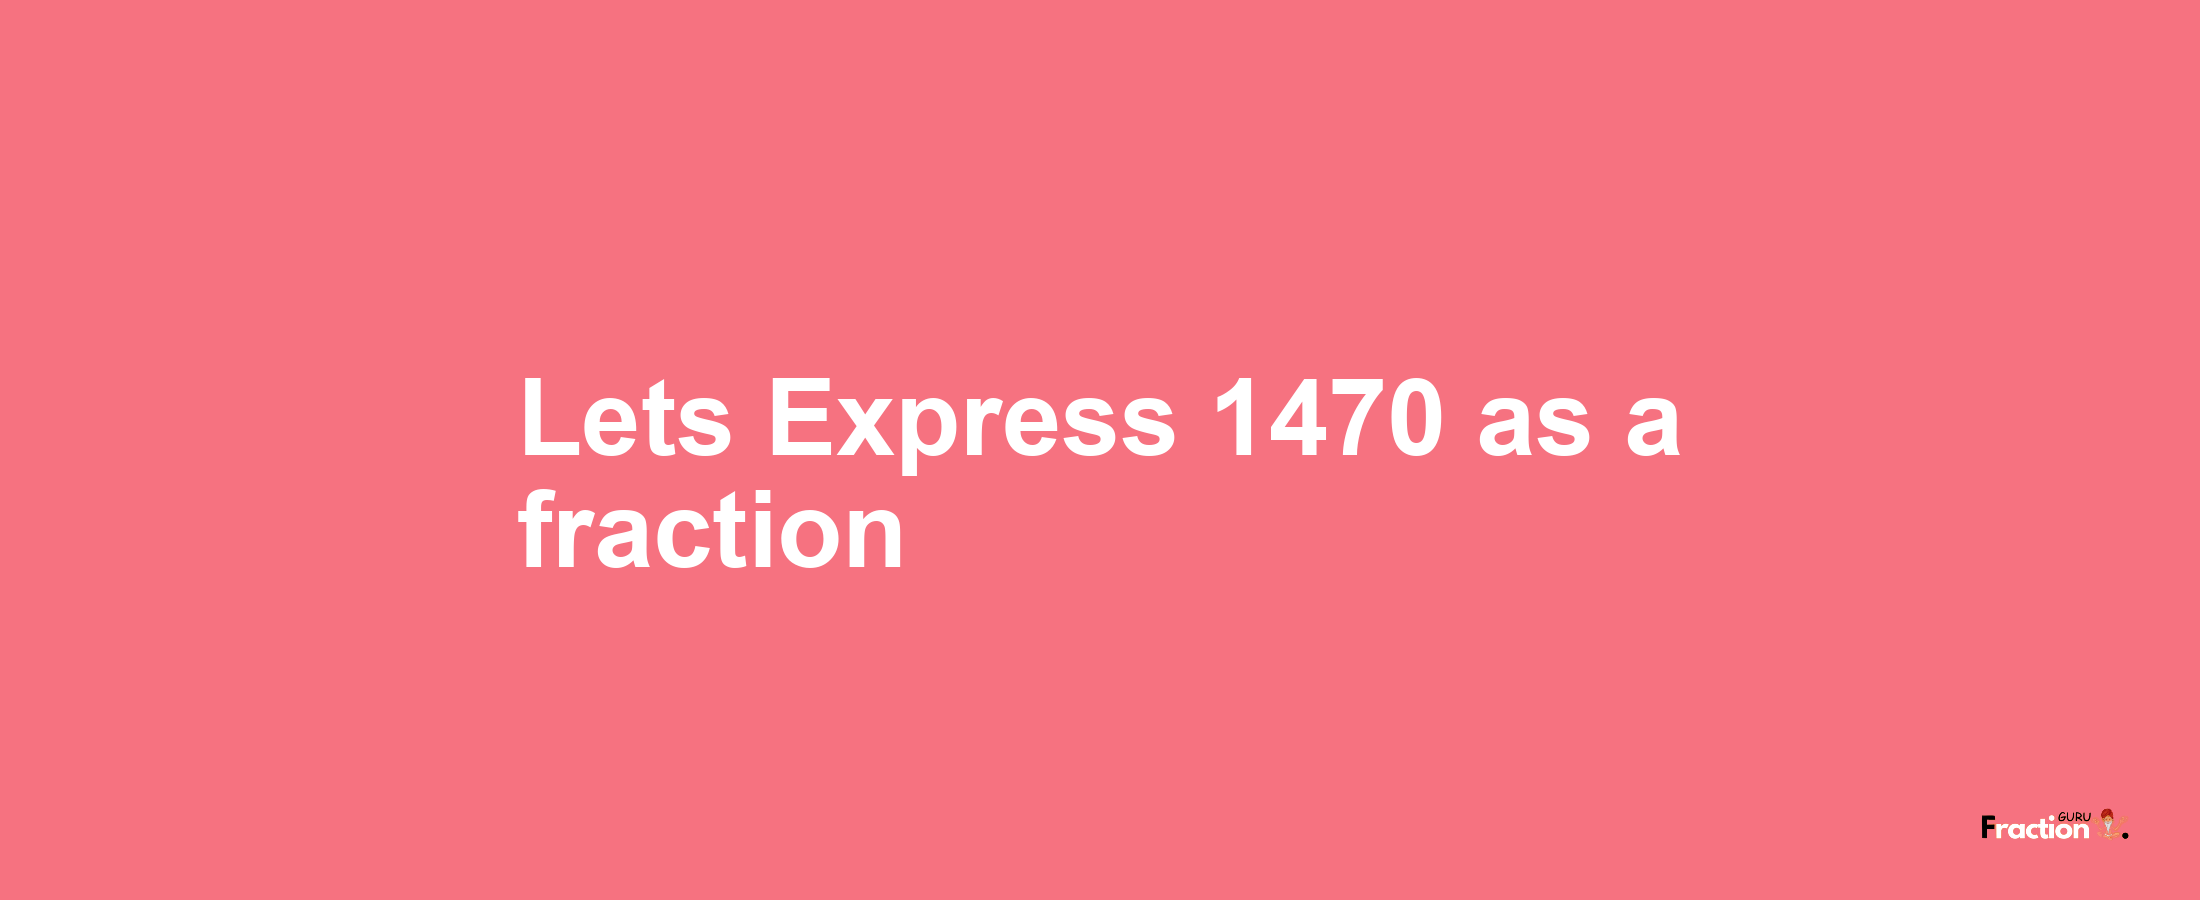 Lets Express 1470 as afraction